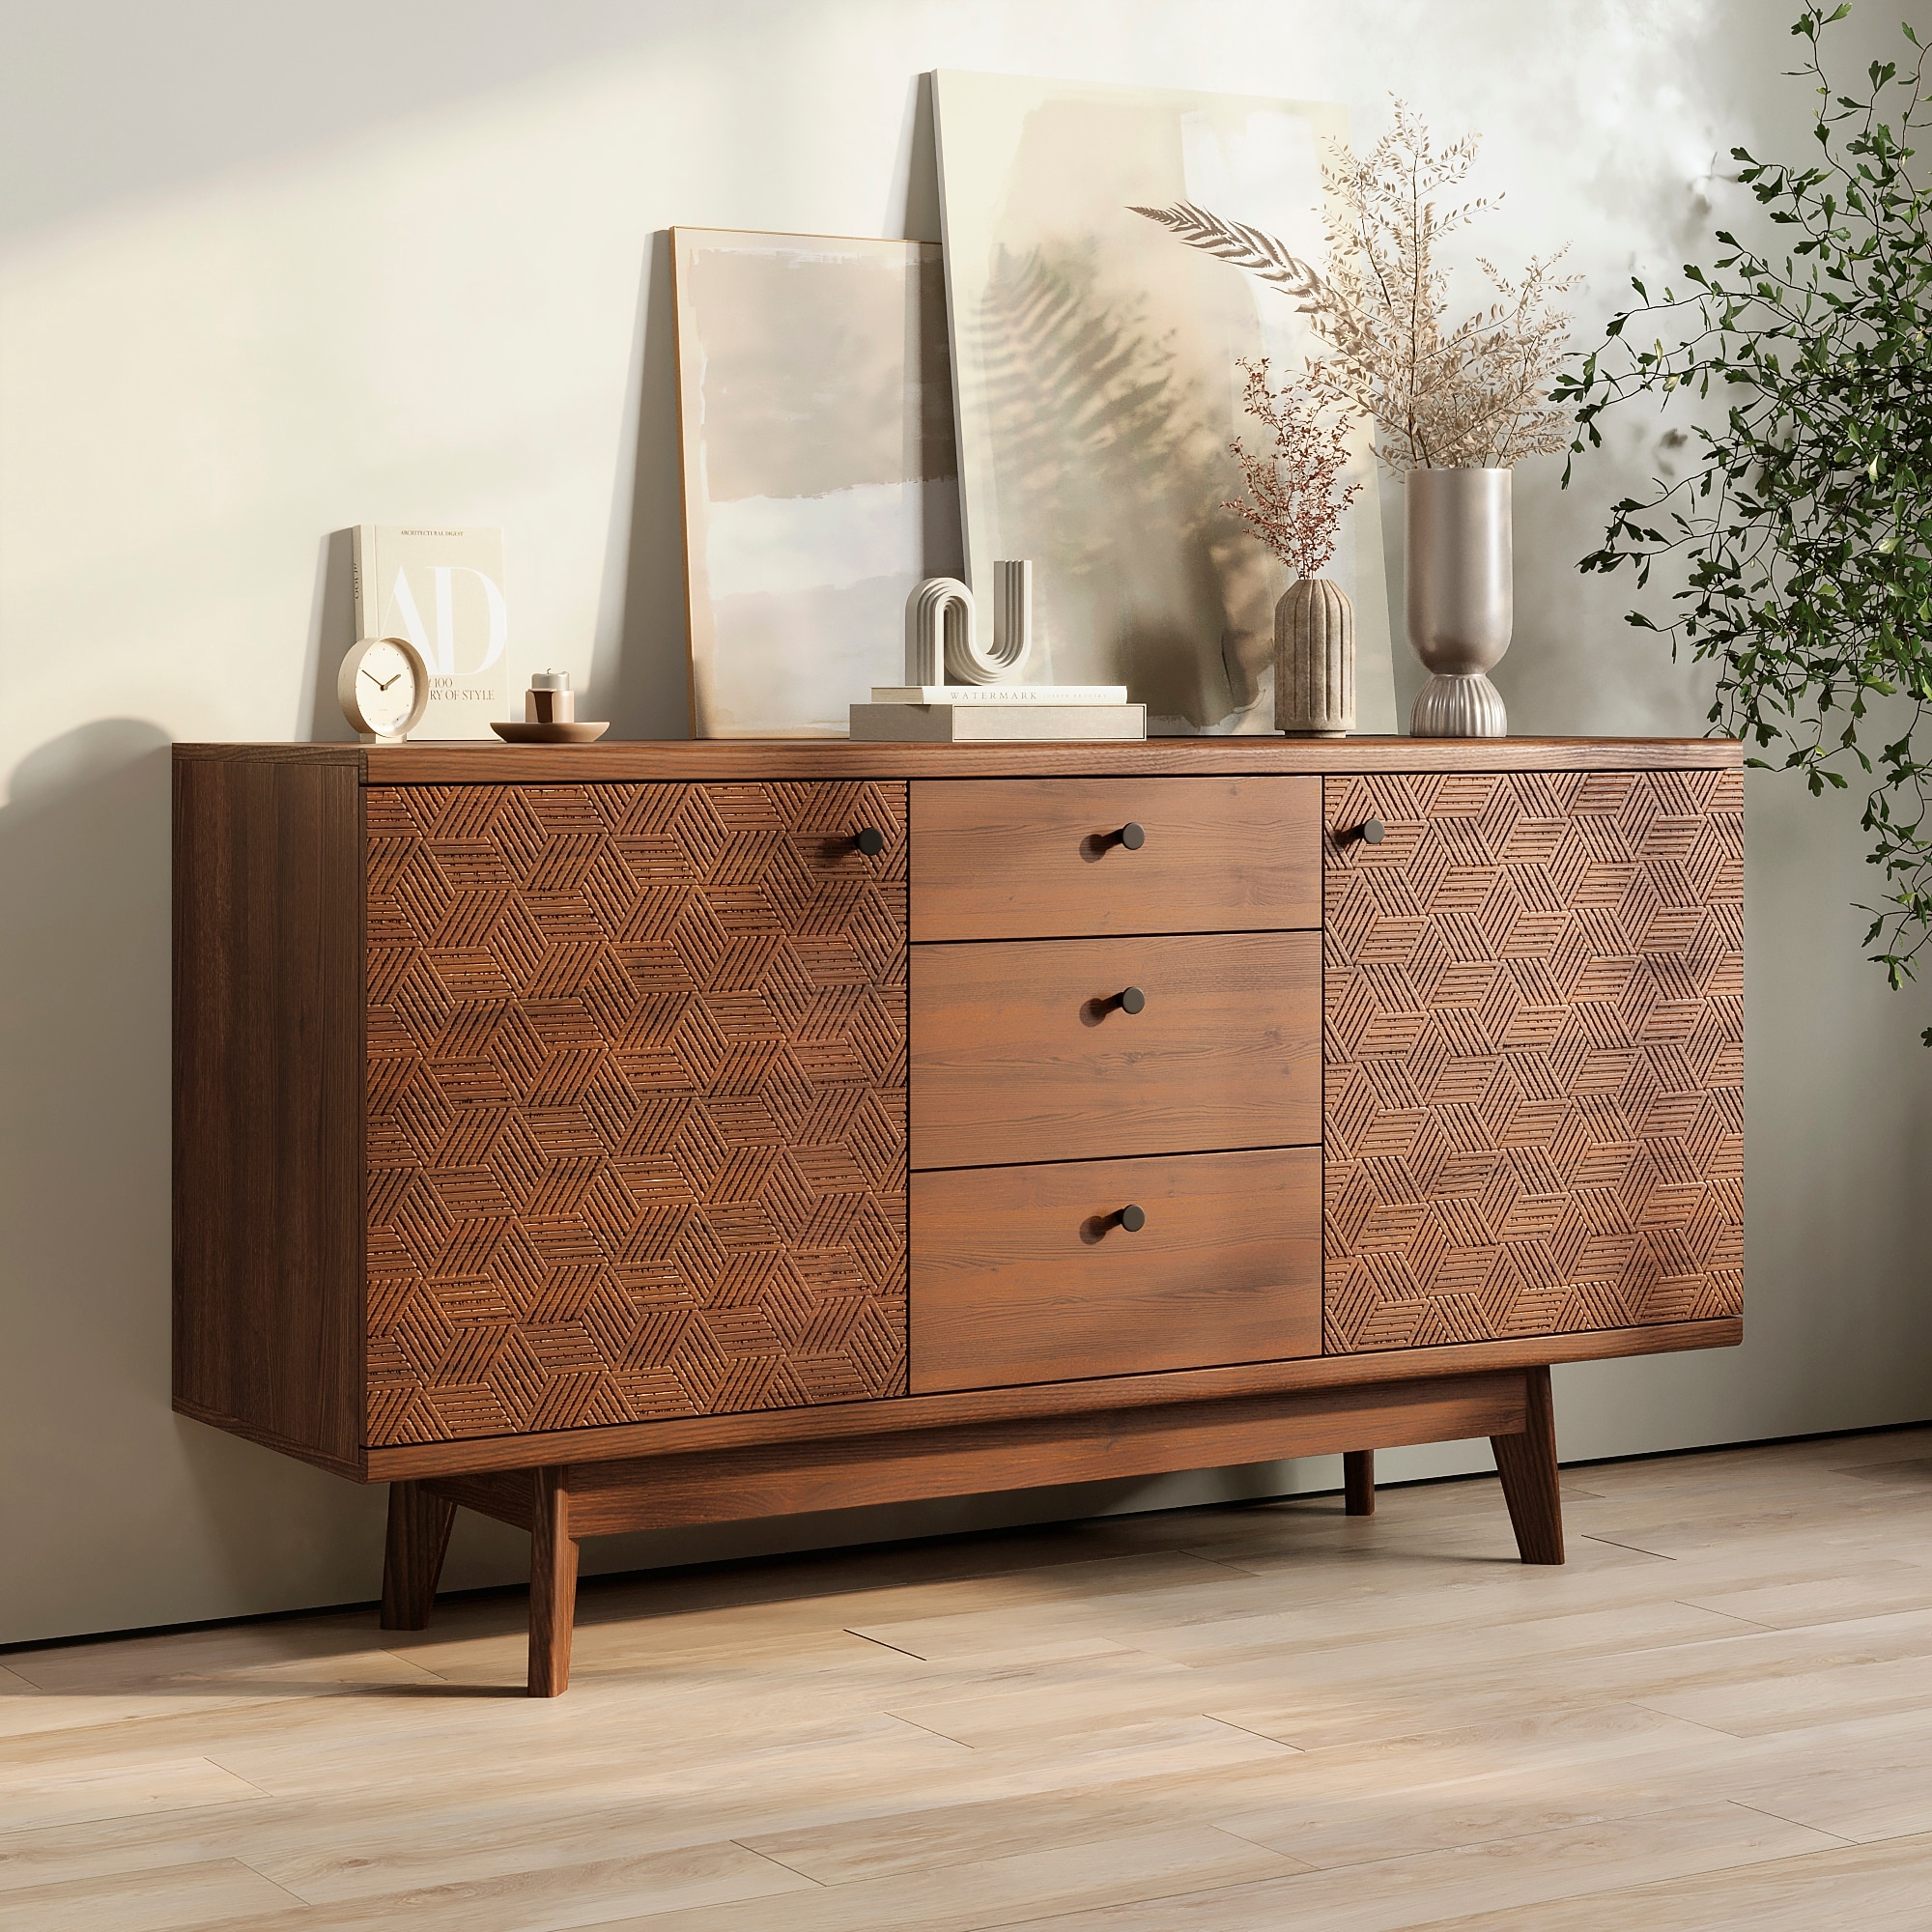 https://ak1.ostkcdn.com/images/products/is/images/direct/e596e4a5b1a01d496011bd869472d5d316cc0280/Living-Skog-Scandi-Sideboard-Buffet-TV-Stand-with-Drawers-and-Wooden-Legs-for-TV%27s-up-to-65-inch-TV.jpg